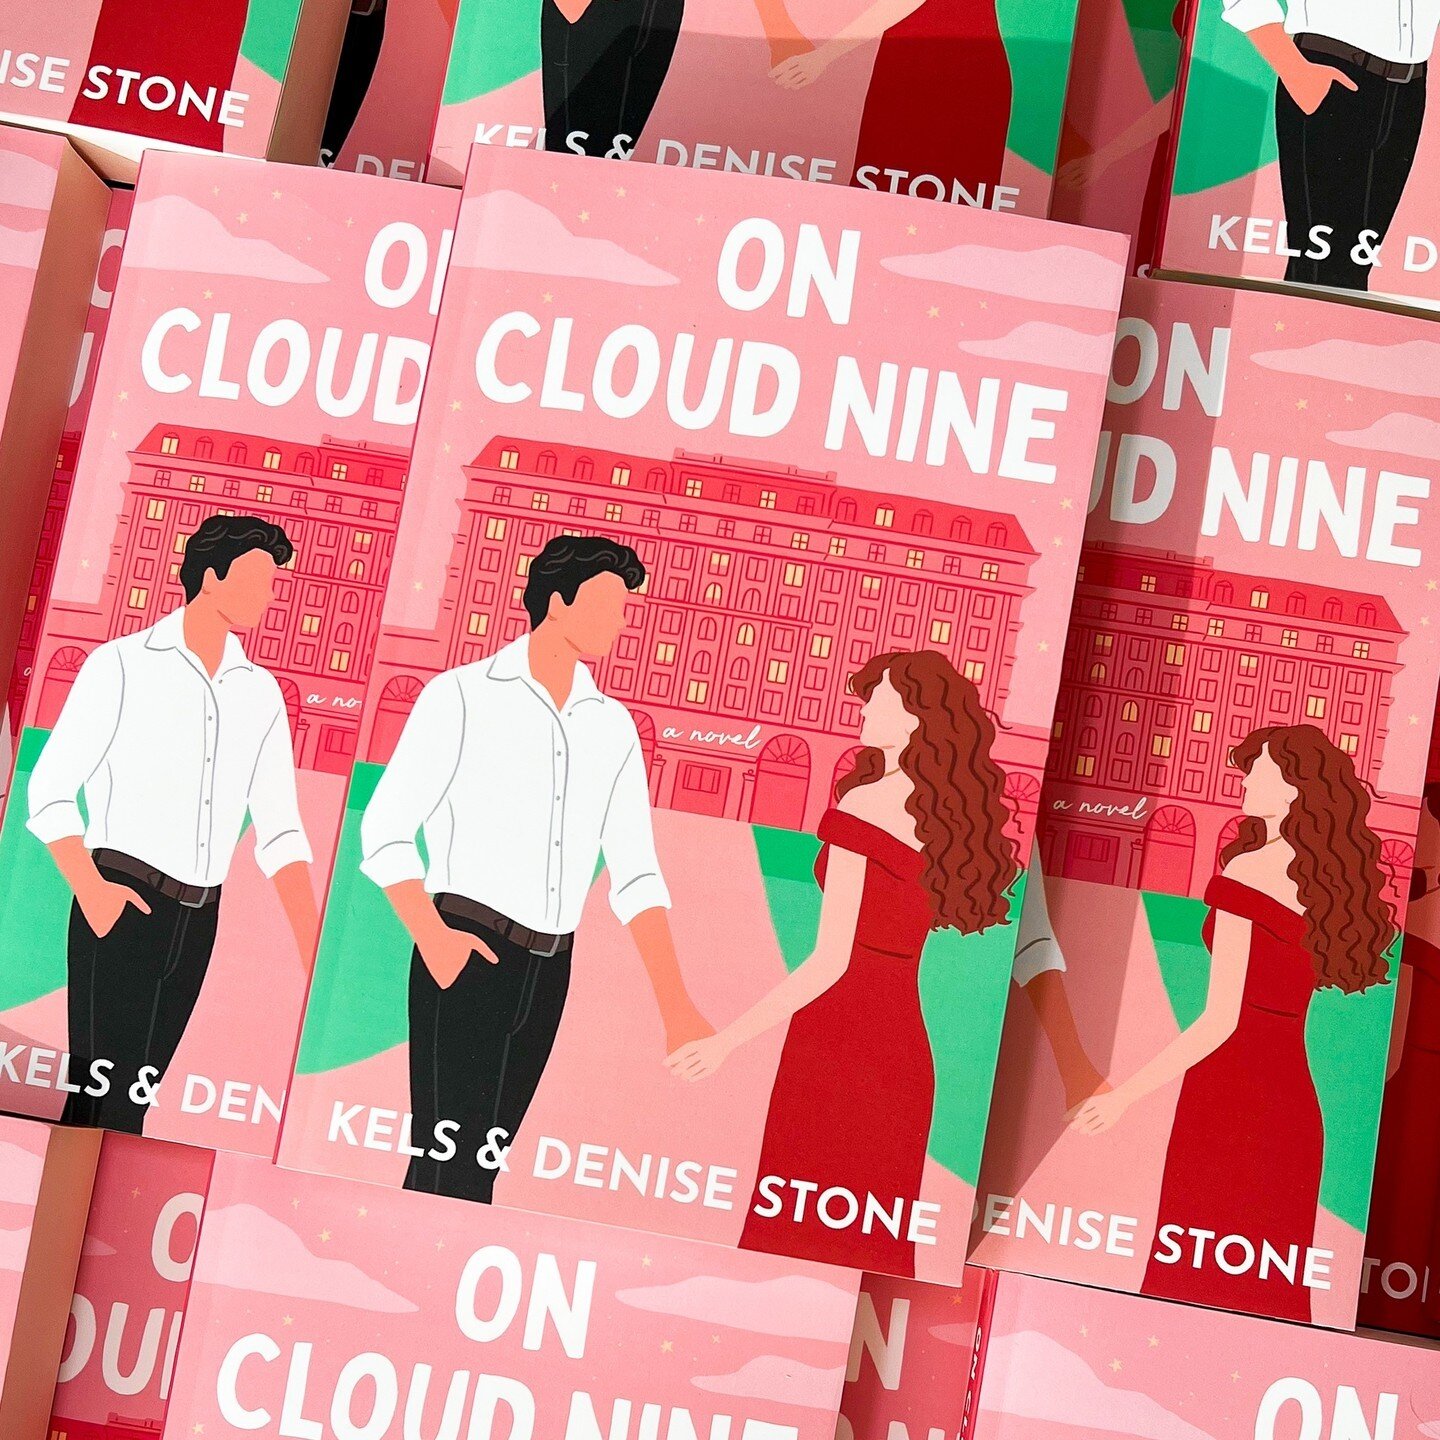 on cloud nine paperback is live 🩷⁠
⁠
Get your copy at http://tinyurl.com/matly⁠
⁠
#OCN will be available on kindle unlimited on 11.1 ⁠
⁠
We are so thrilled to have Matthew and Molly out in the universe soon 🥹 thank you to everyone who gives our boo